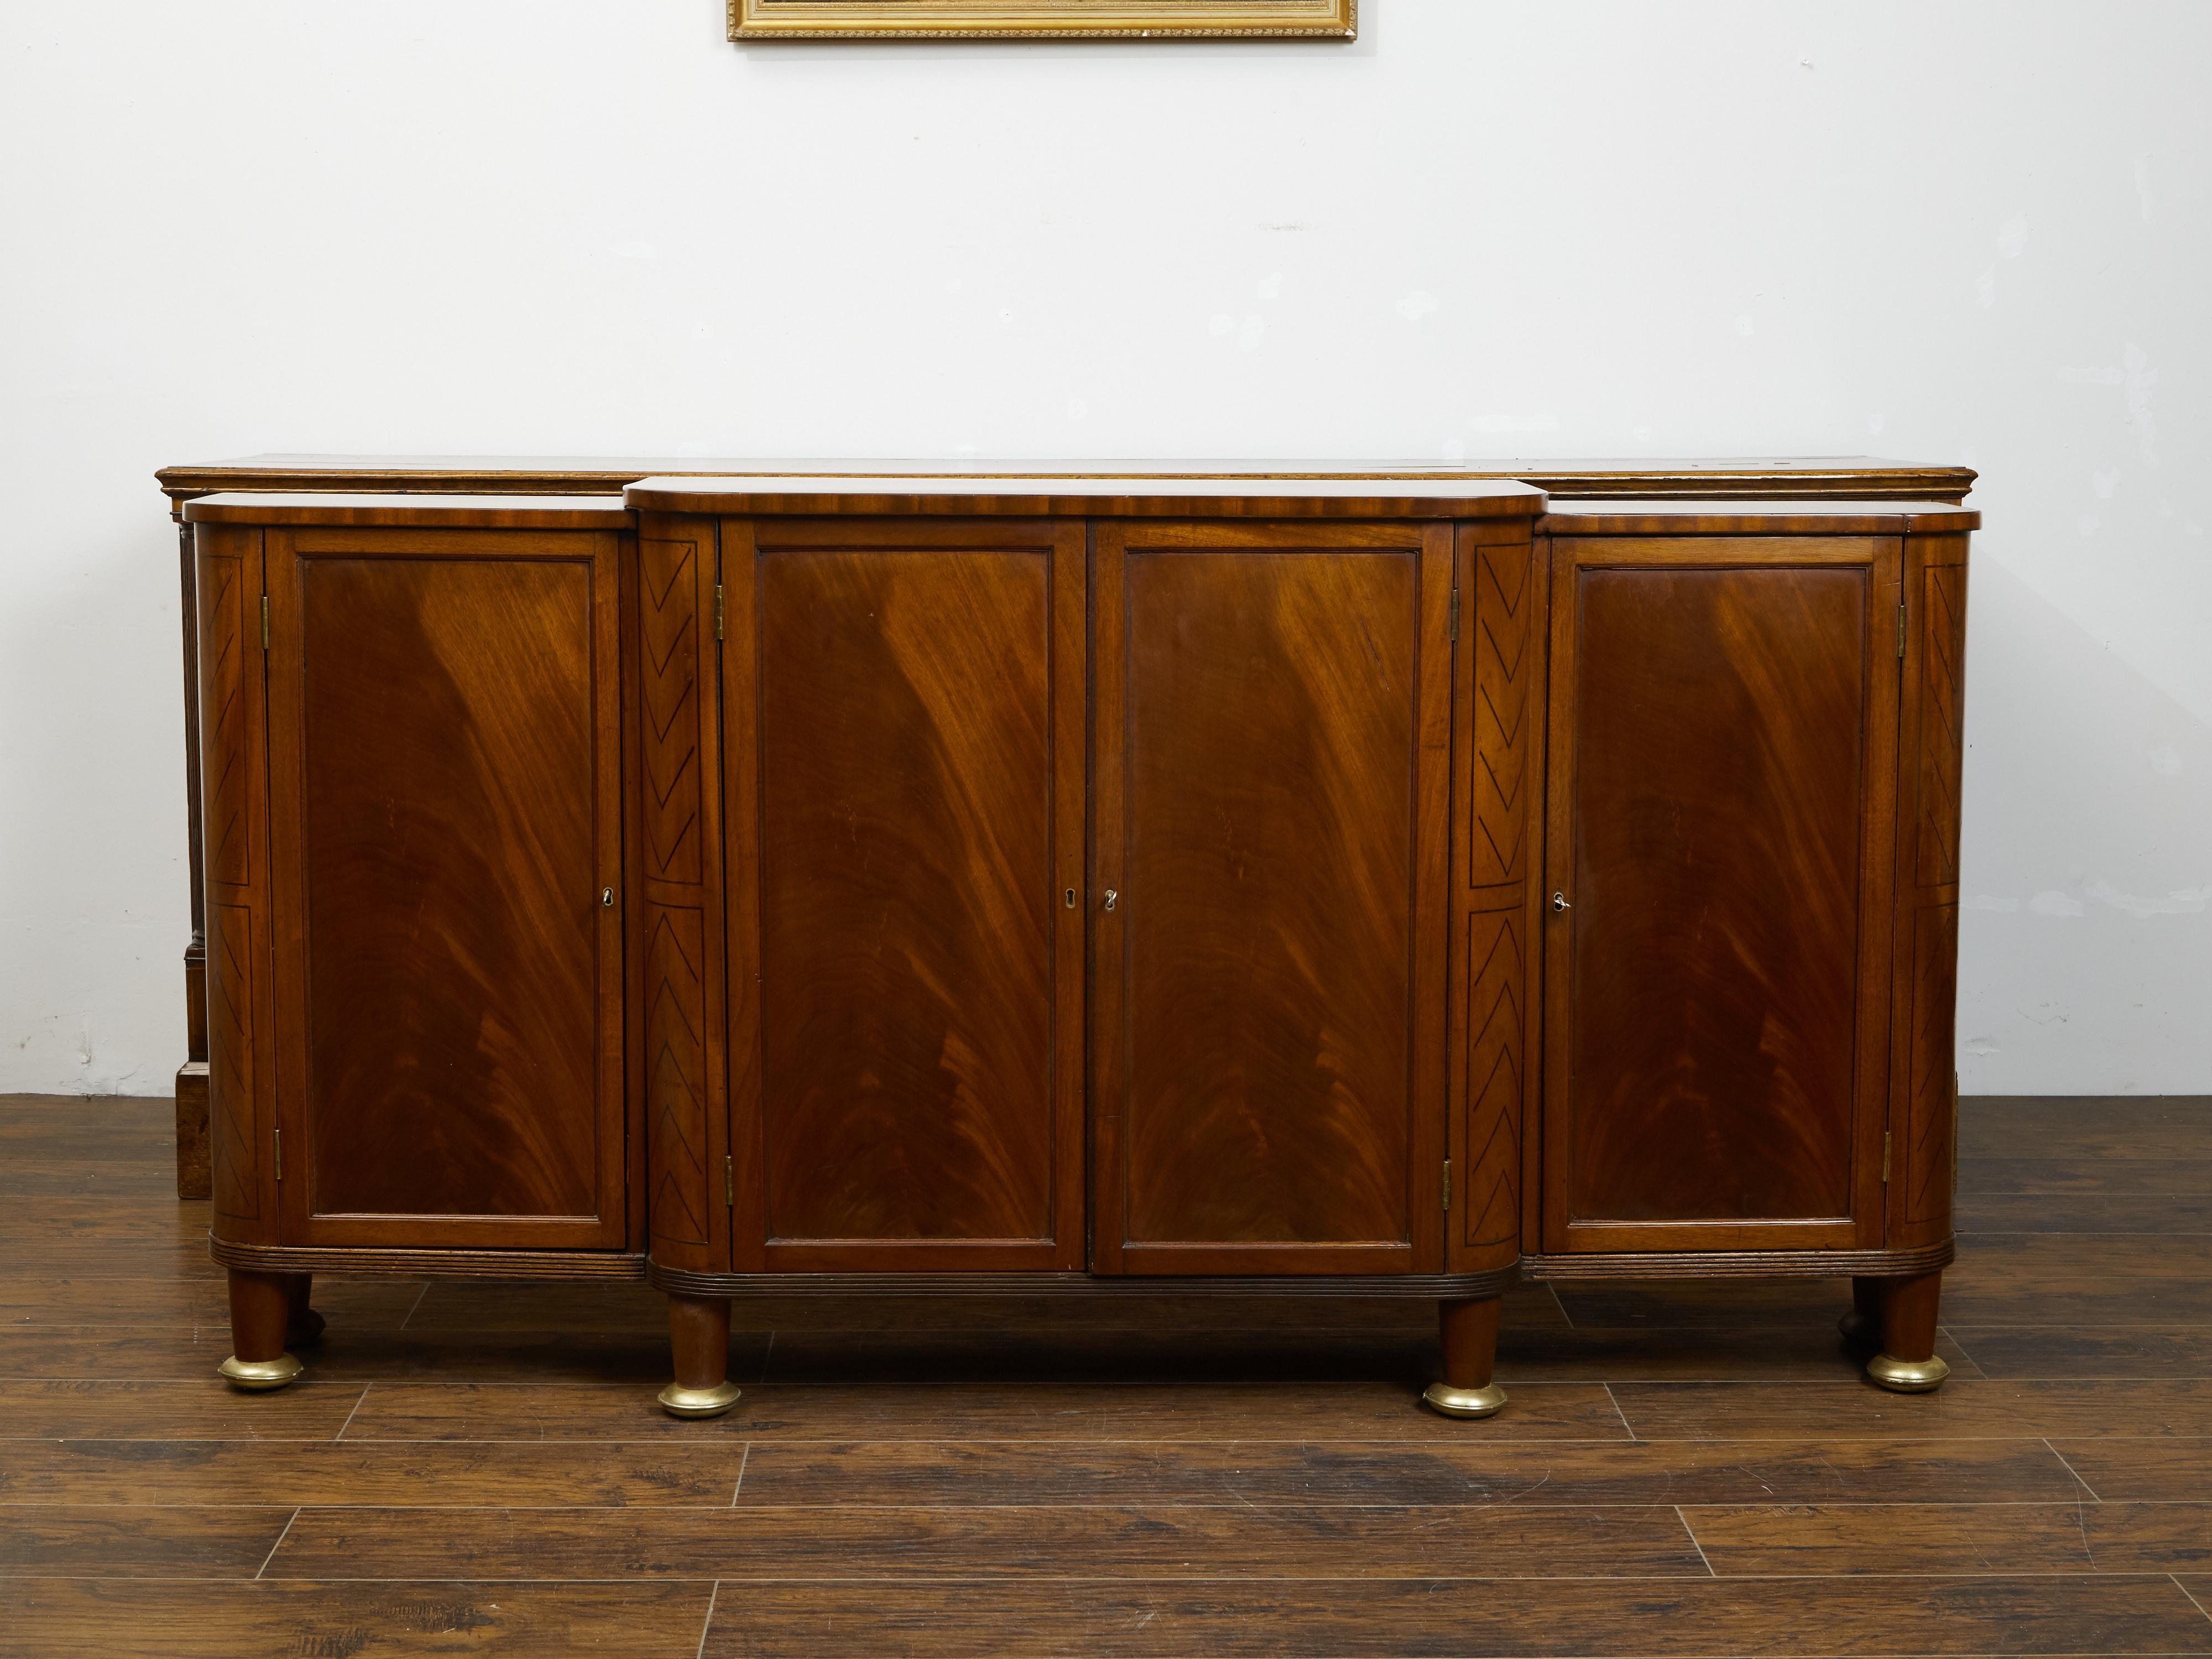 An English Regency period mahogany breakfront buffet from the early 19th century, with four doors, geometric inlay and brass details. Created in England during the Regency period in the second quarter of the 19th century, this mahogany buffet